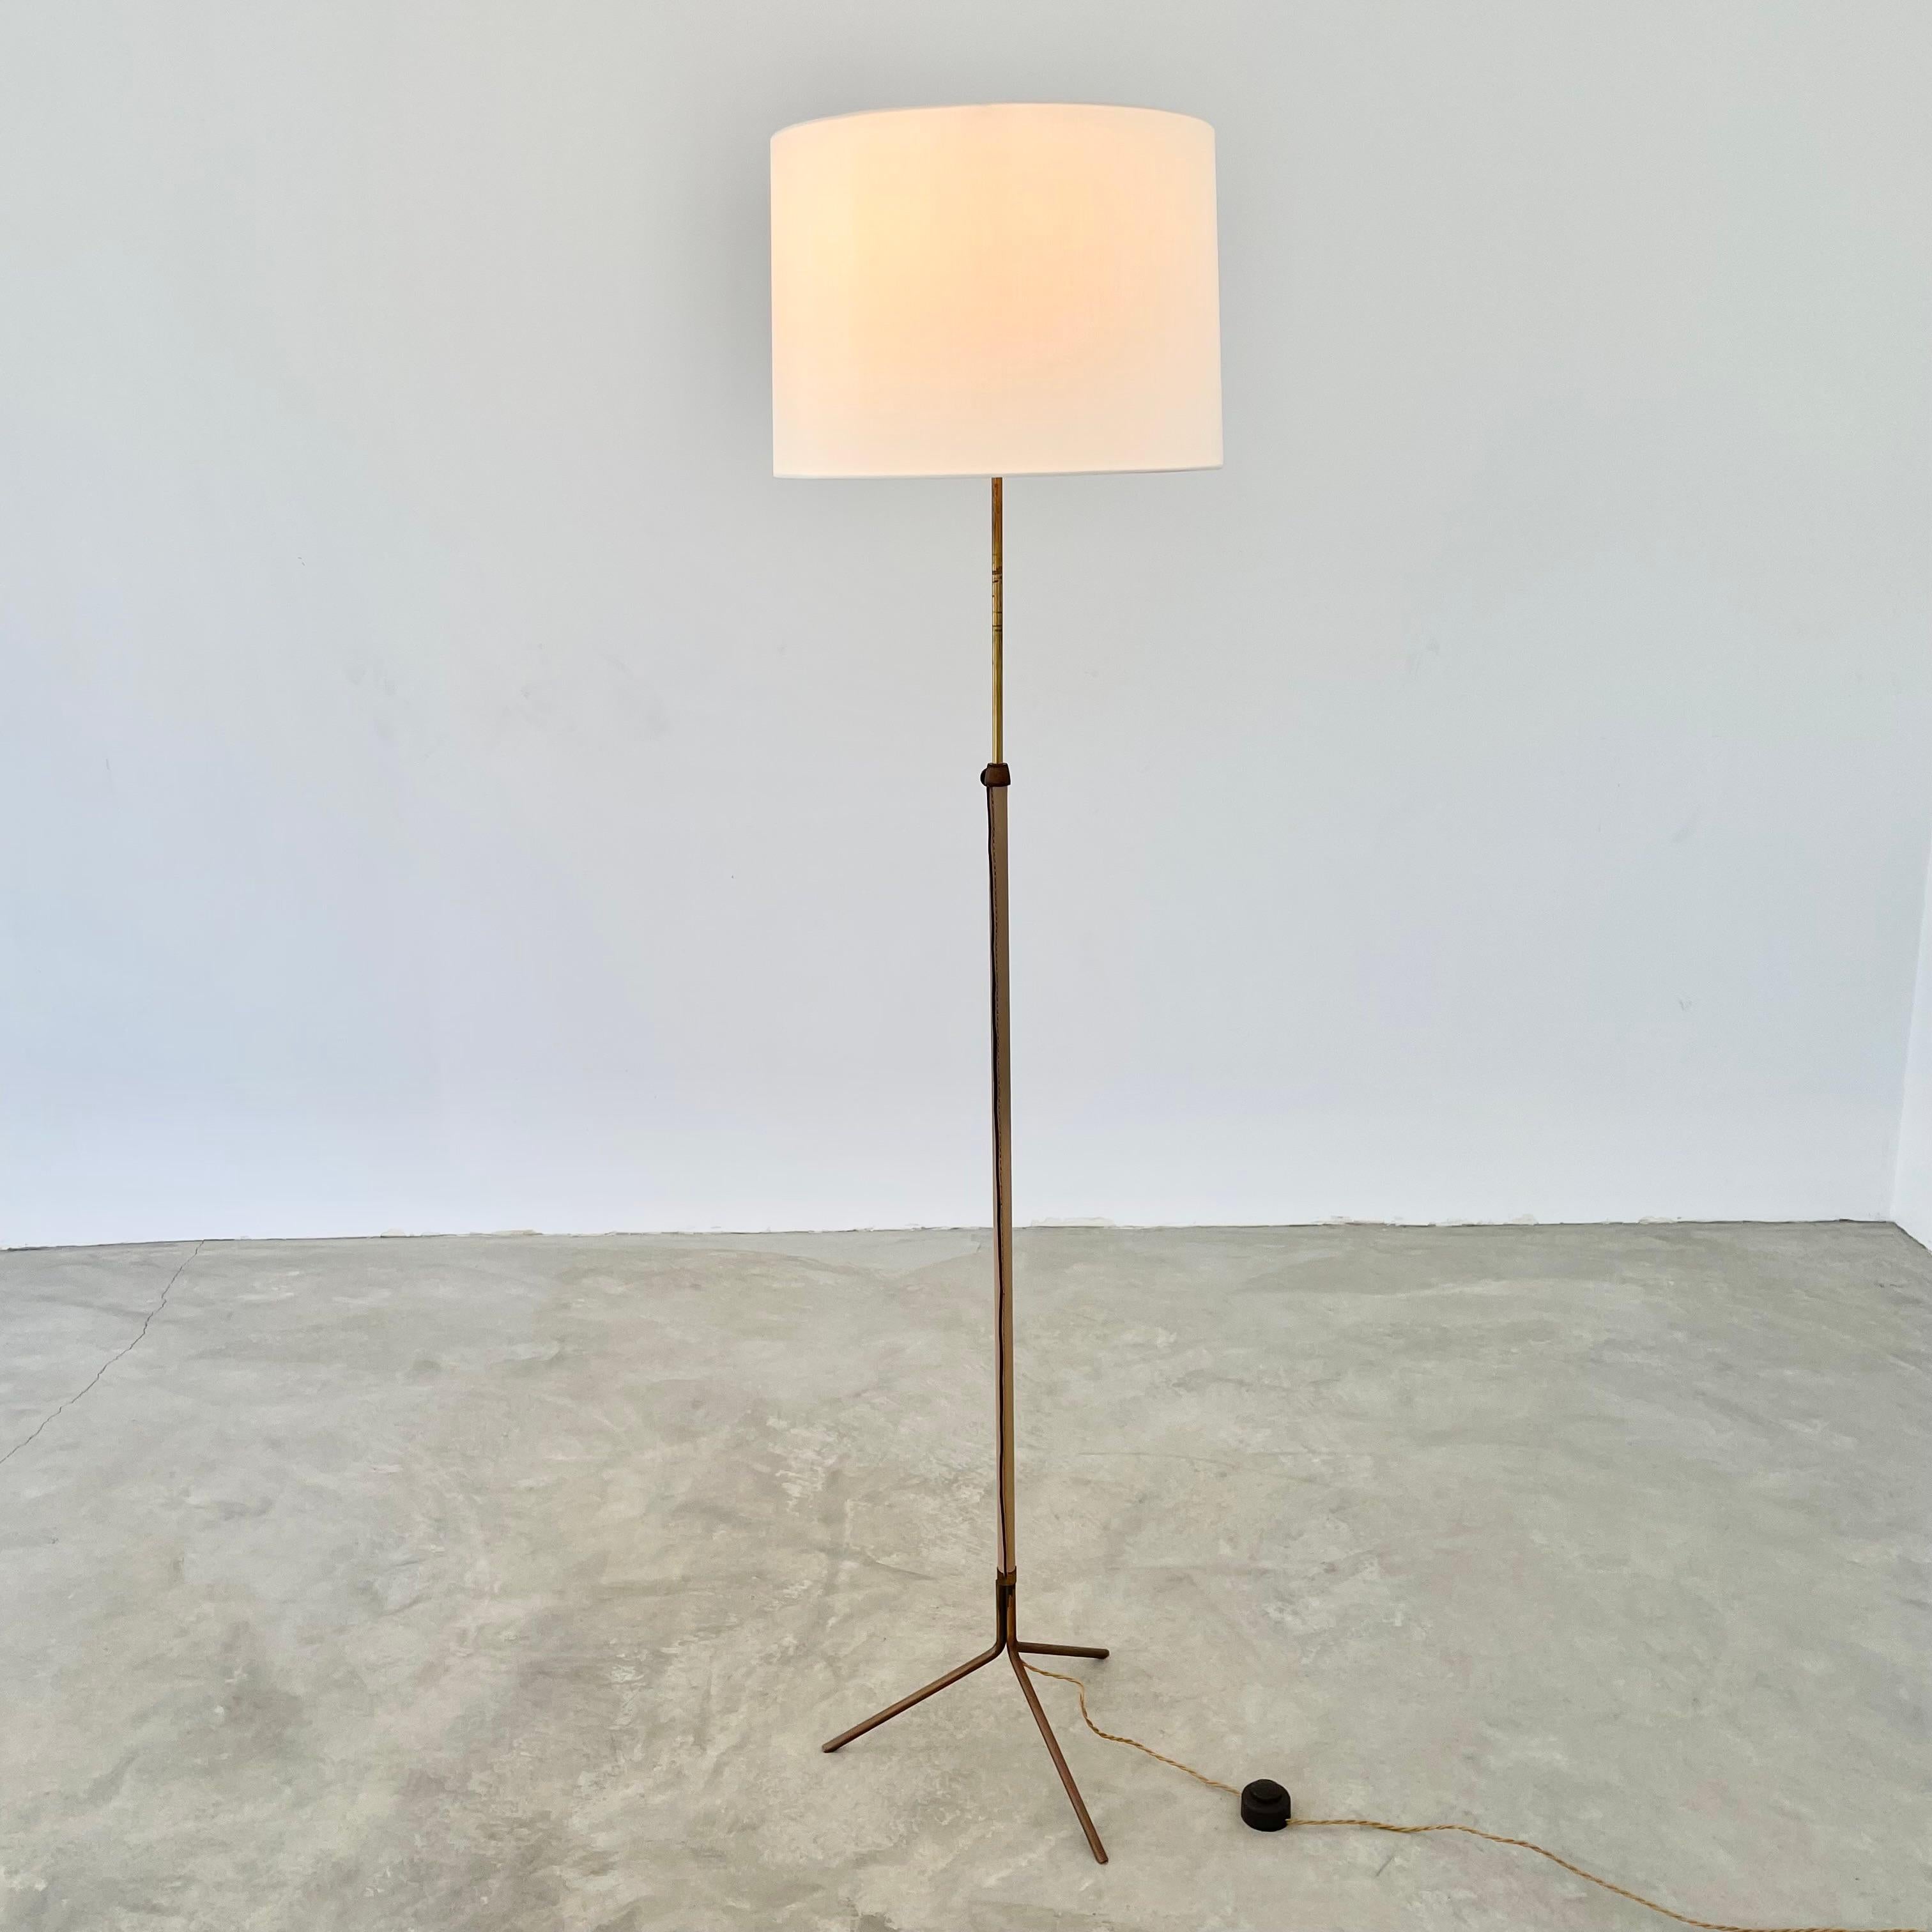 Handsome brass and leather floor lamp in the style of French designer Jacques Adnet. Circa 1950s. Beige leather wrapping the full length of lamp. Height adjustable brass rod runs inside. Signature Adnet contrast stitching. Lamp has been fitted with